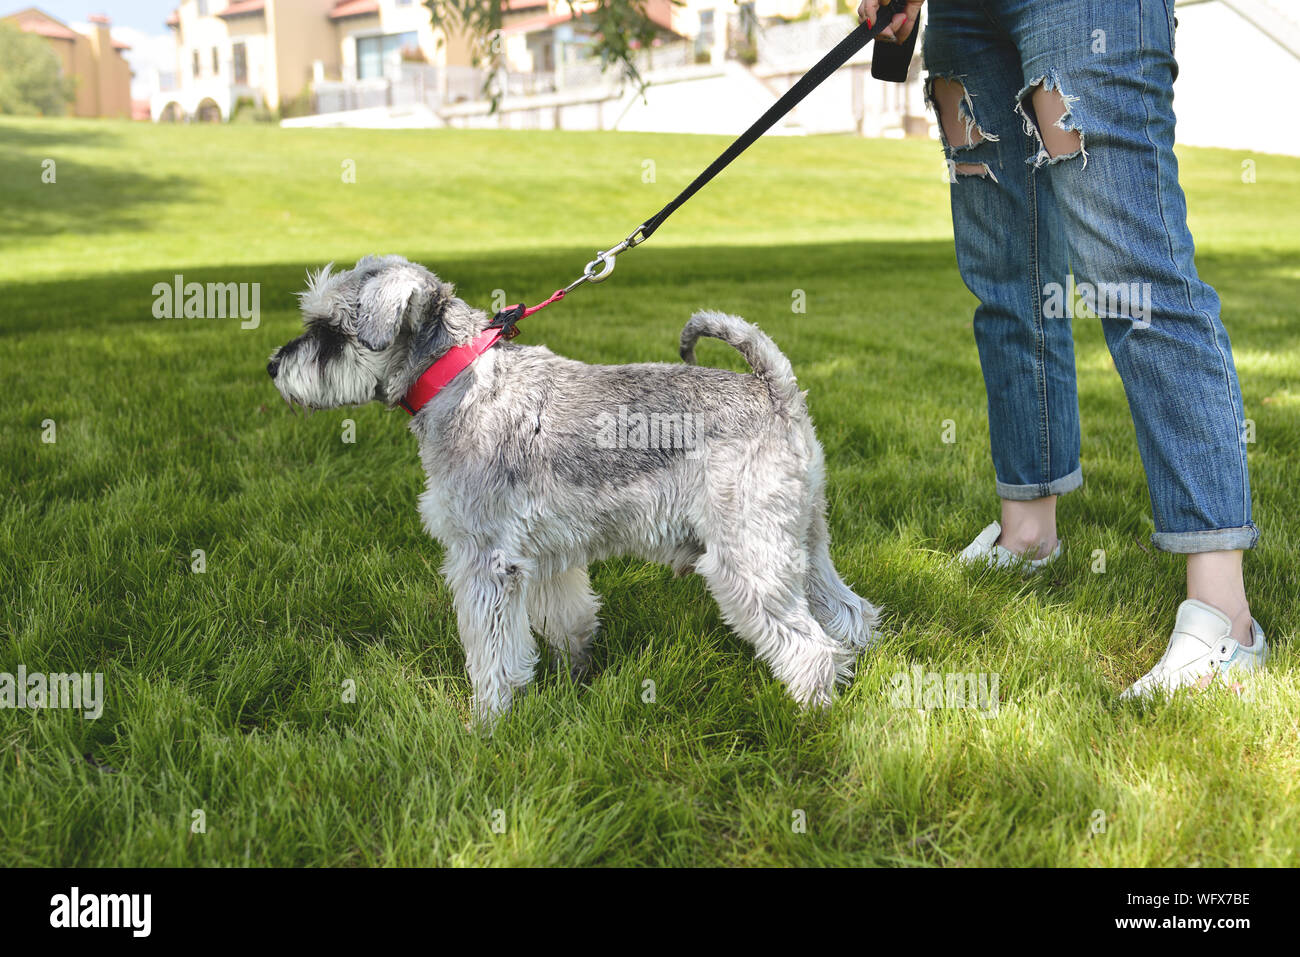 The owner of the dog walks his beautiful dog Schnauzer in the park. close view Stock Photo